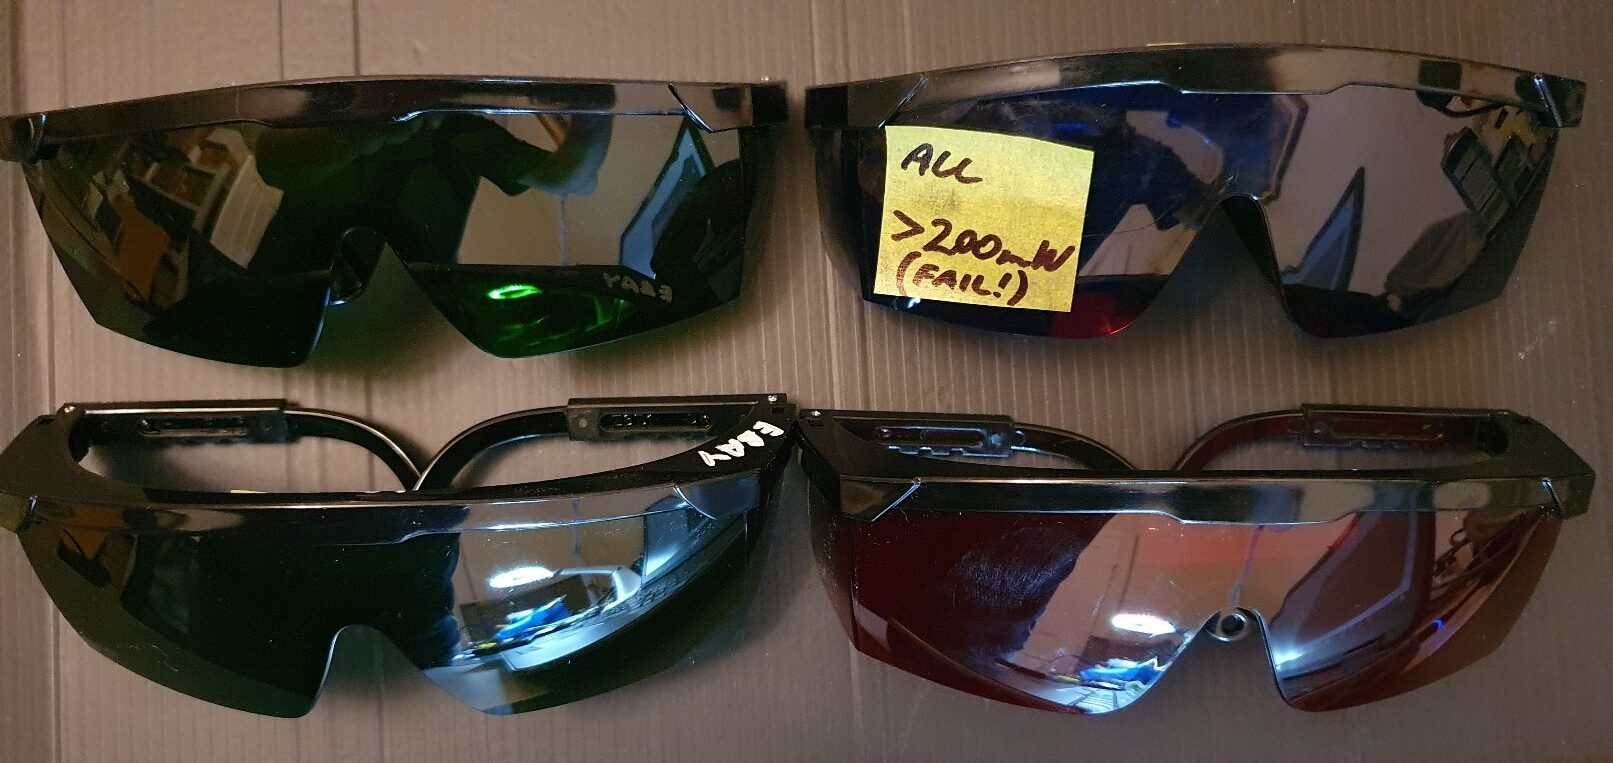 Laser safety glasses that do not protect the user